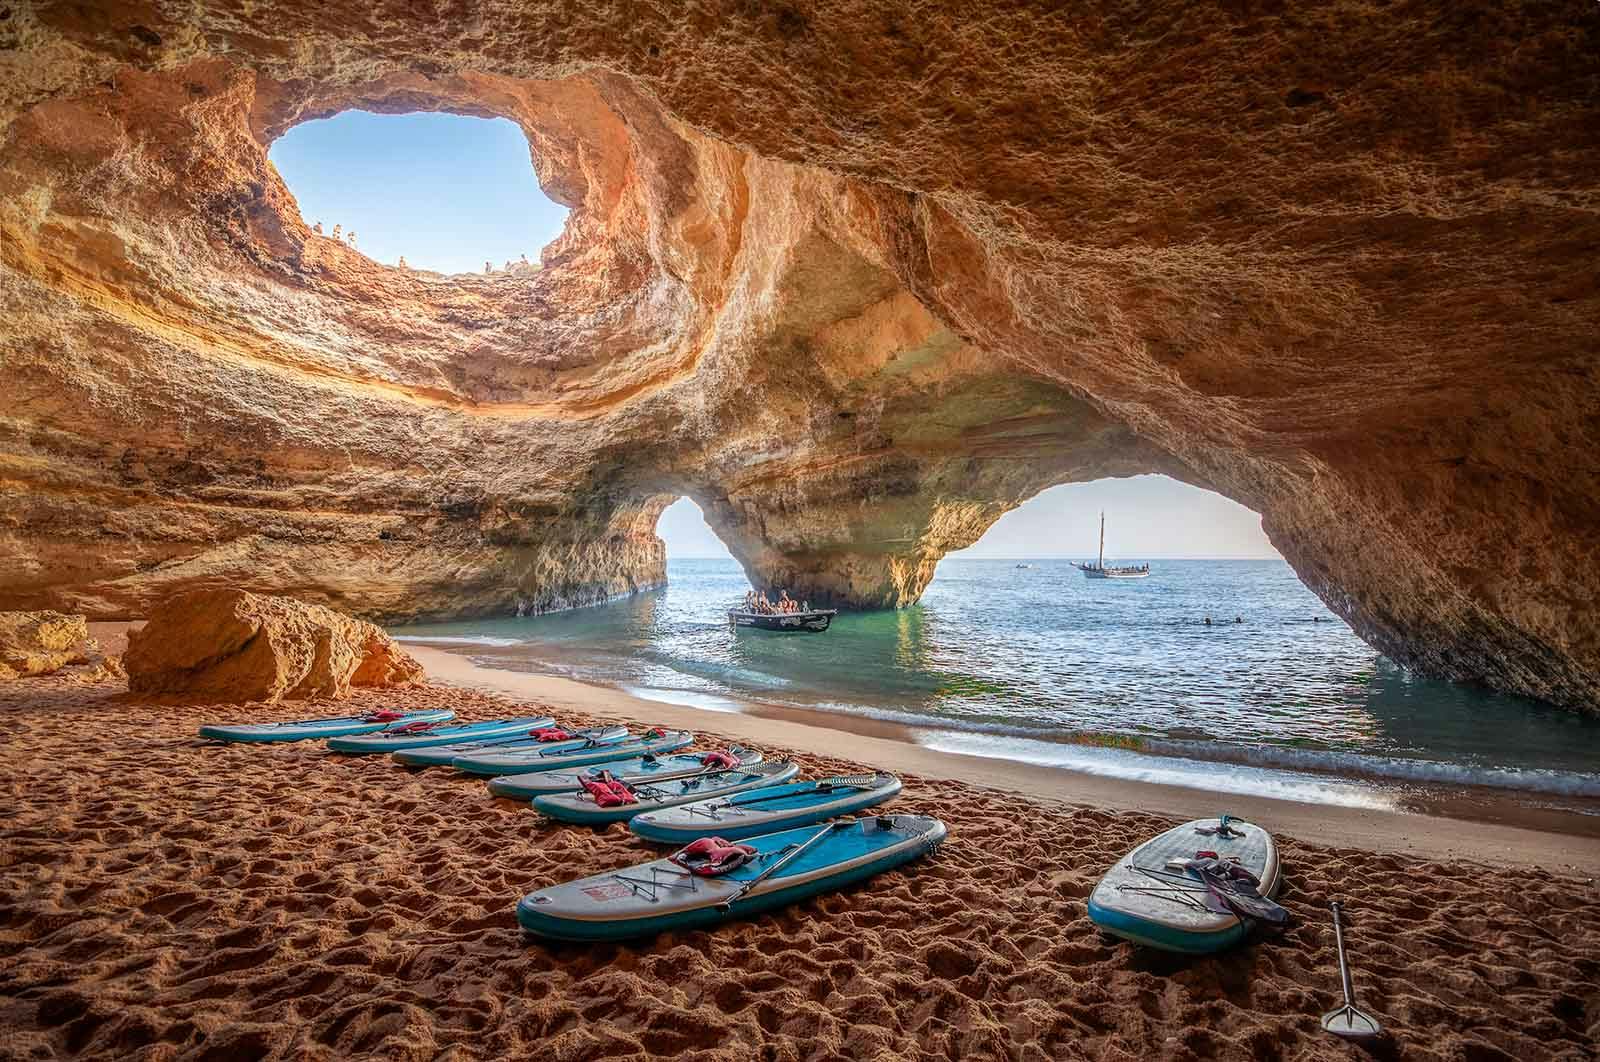 Kayak to Benagil cave at sunrise is often at the top of Algarve highlights lists.